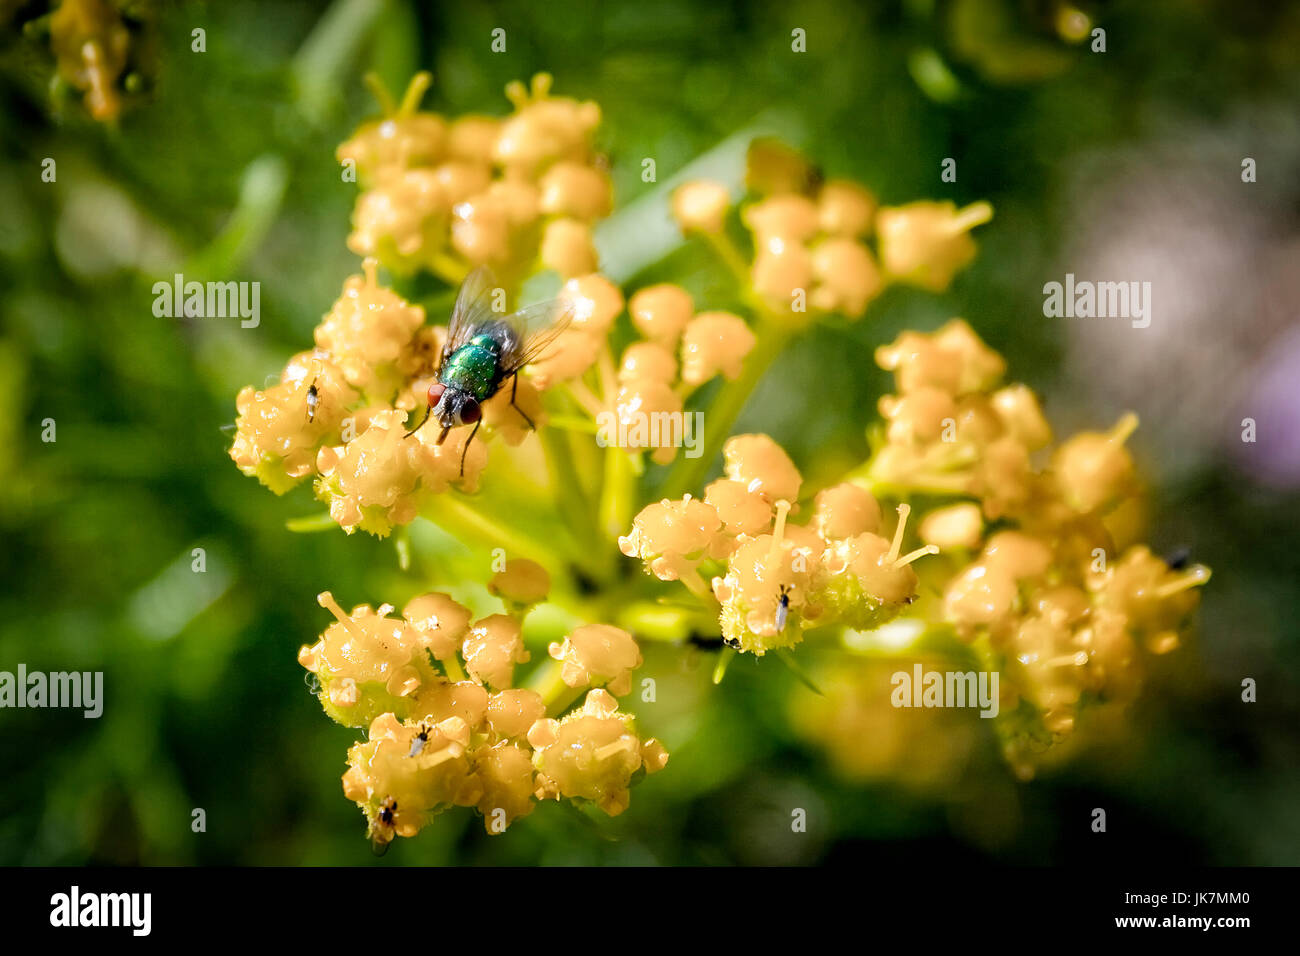 Green fly on a yellow flower Stock Photo